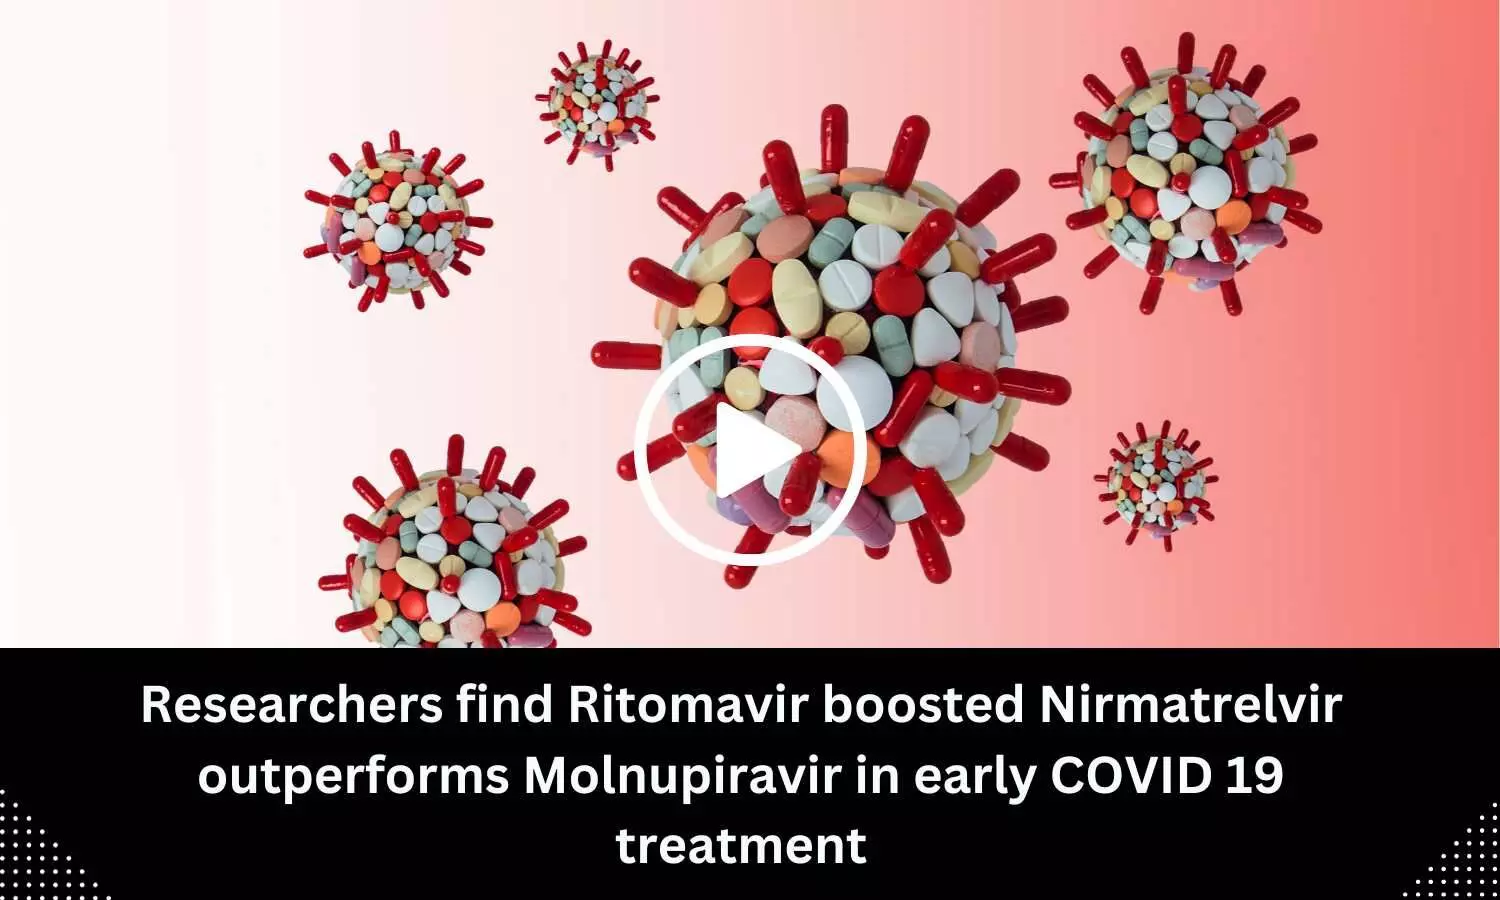 Researchers find Ritomavir boosted Nirmatrelvir outperforms Molnupiravir in early COVID 19 treatment